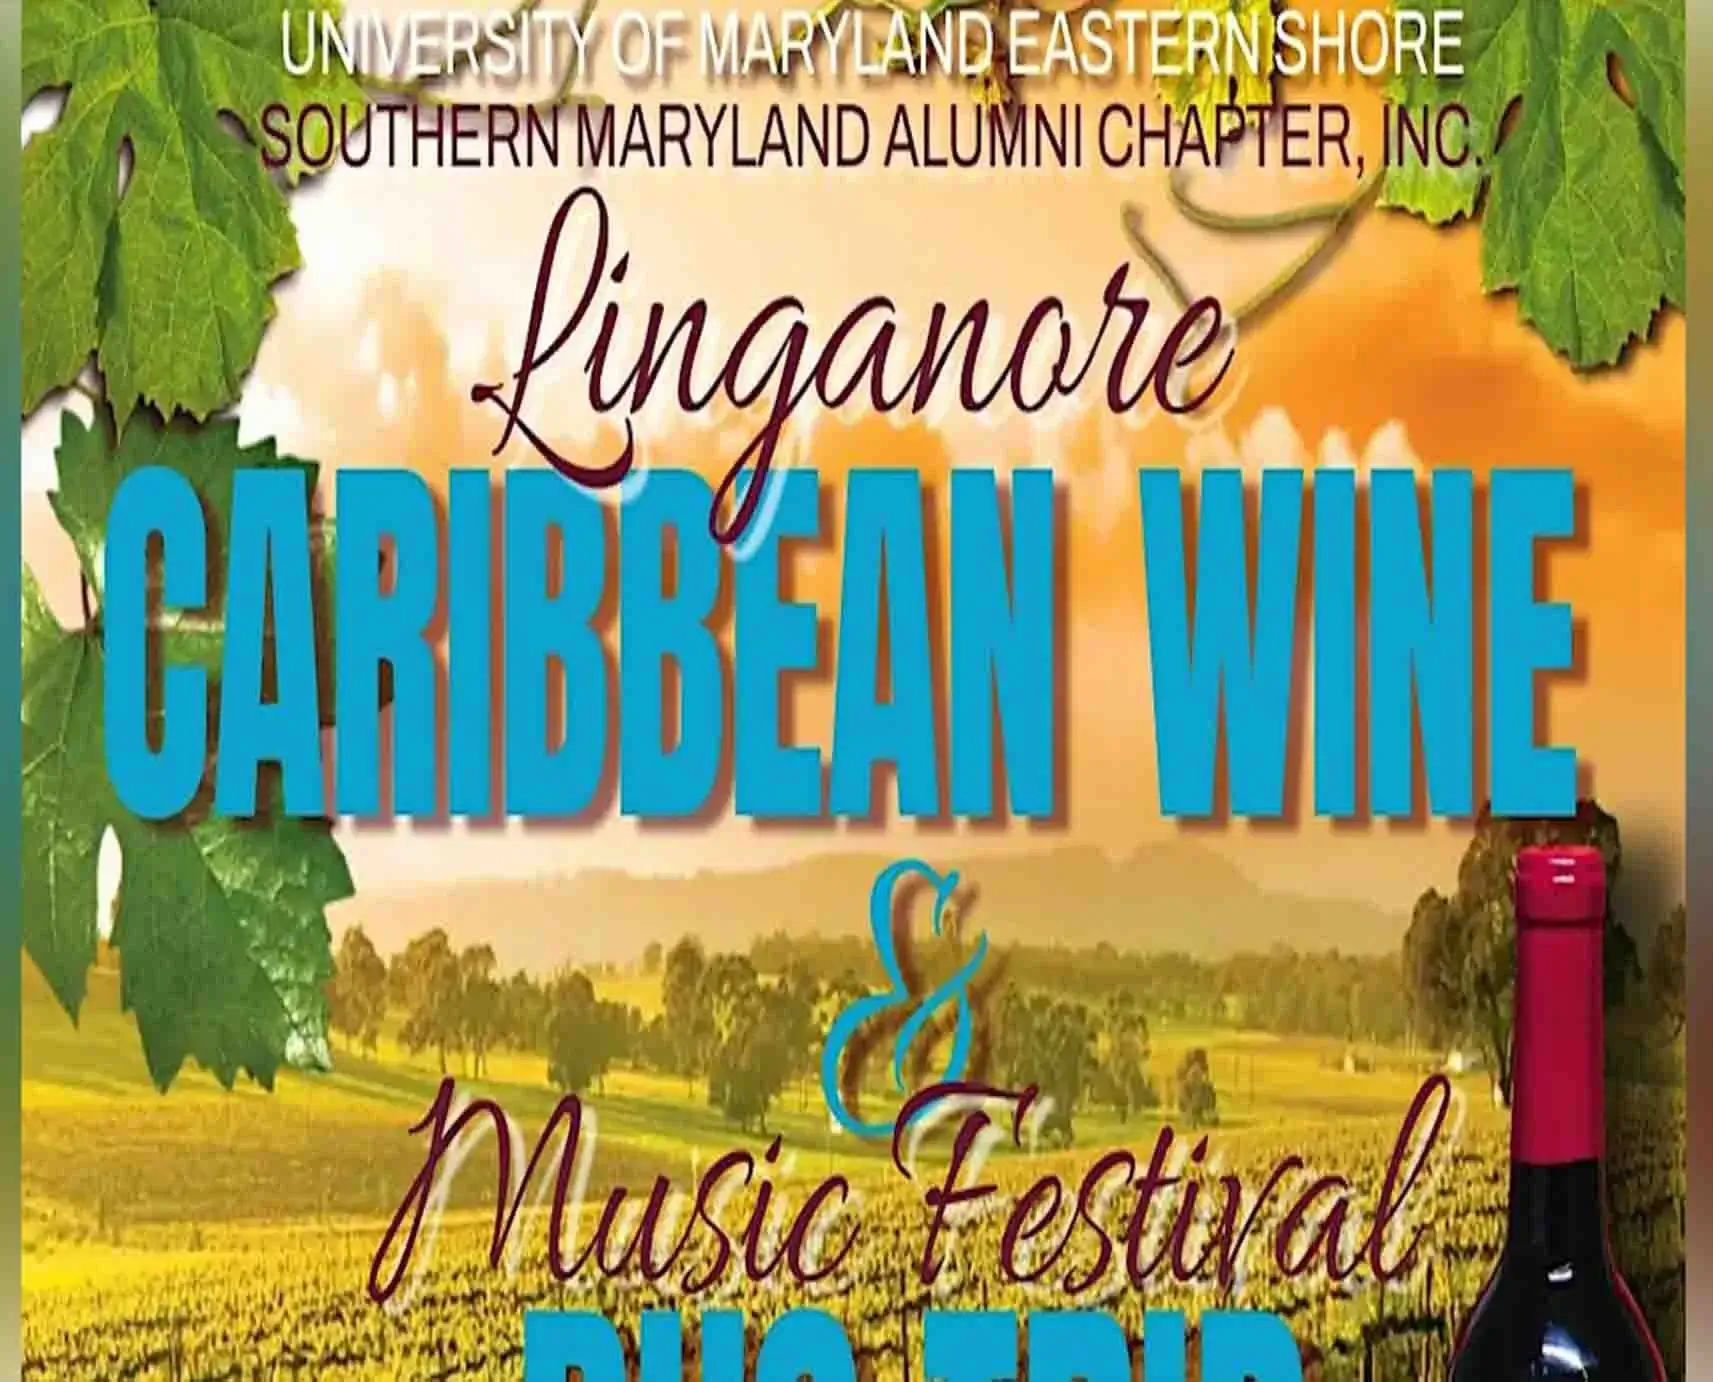 UMES Southern MD Hawk's Caribbean Wine & Music Festival Bus Trip